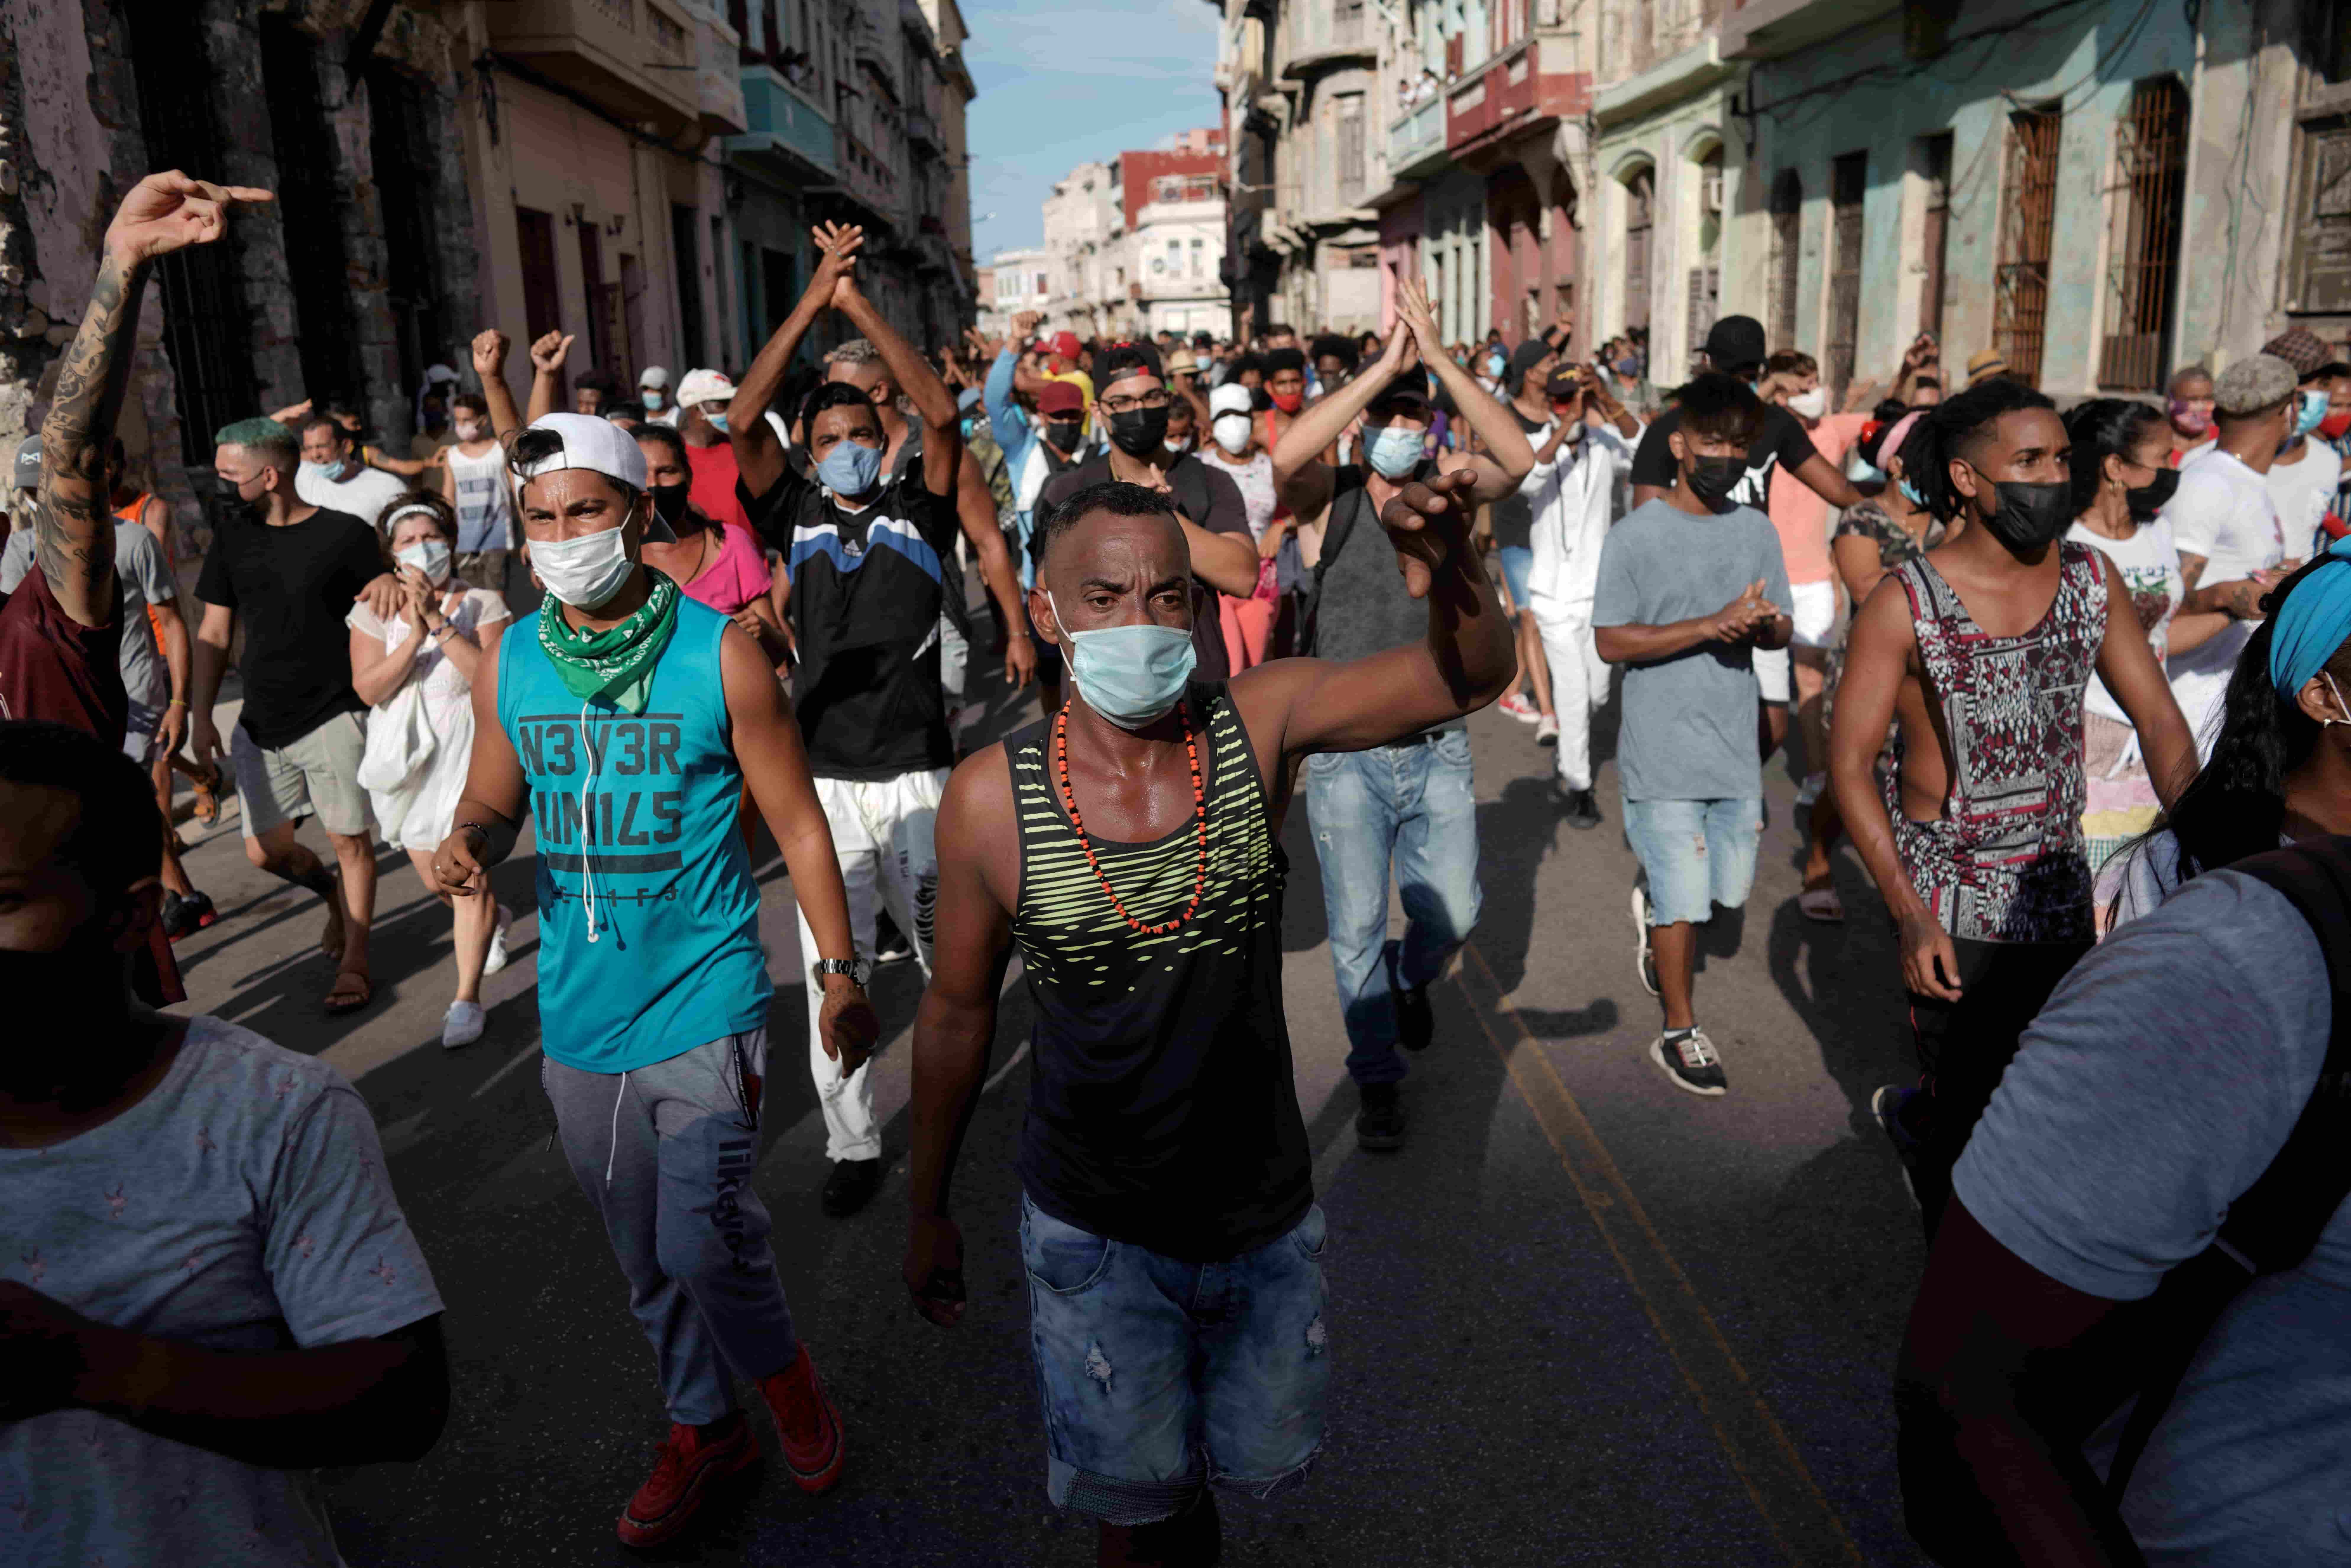 Cuba July 11 Protests-Reuters photo licensed